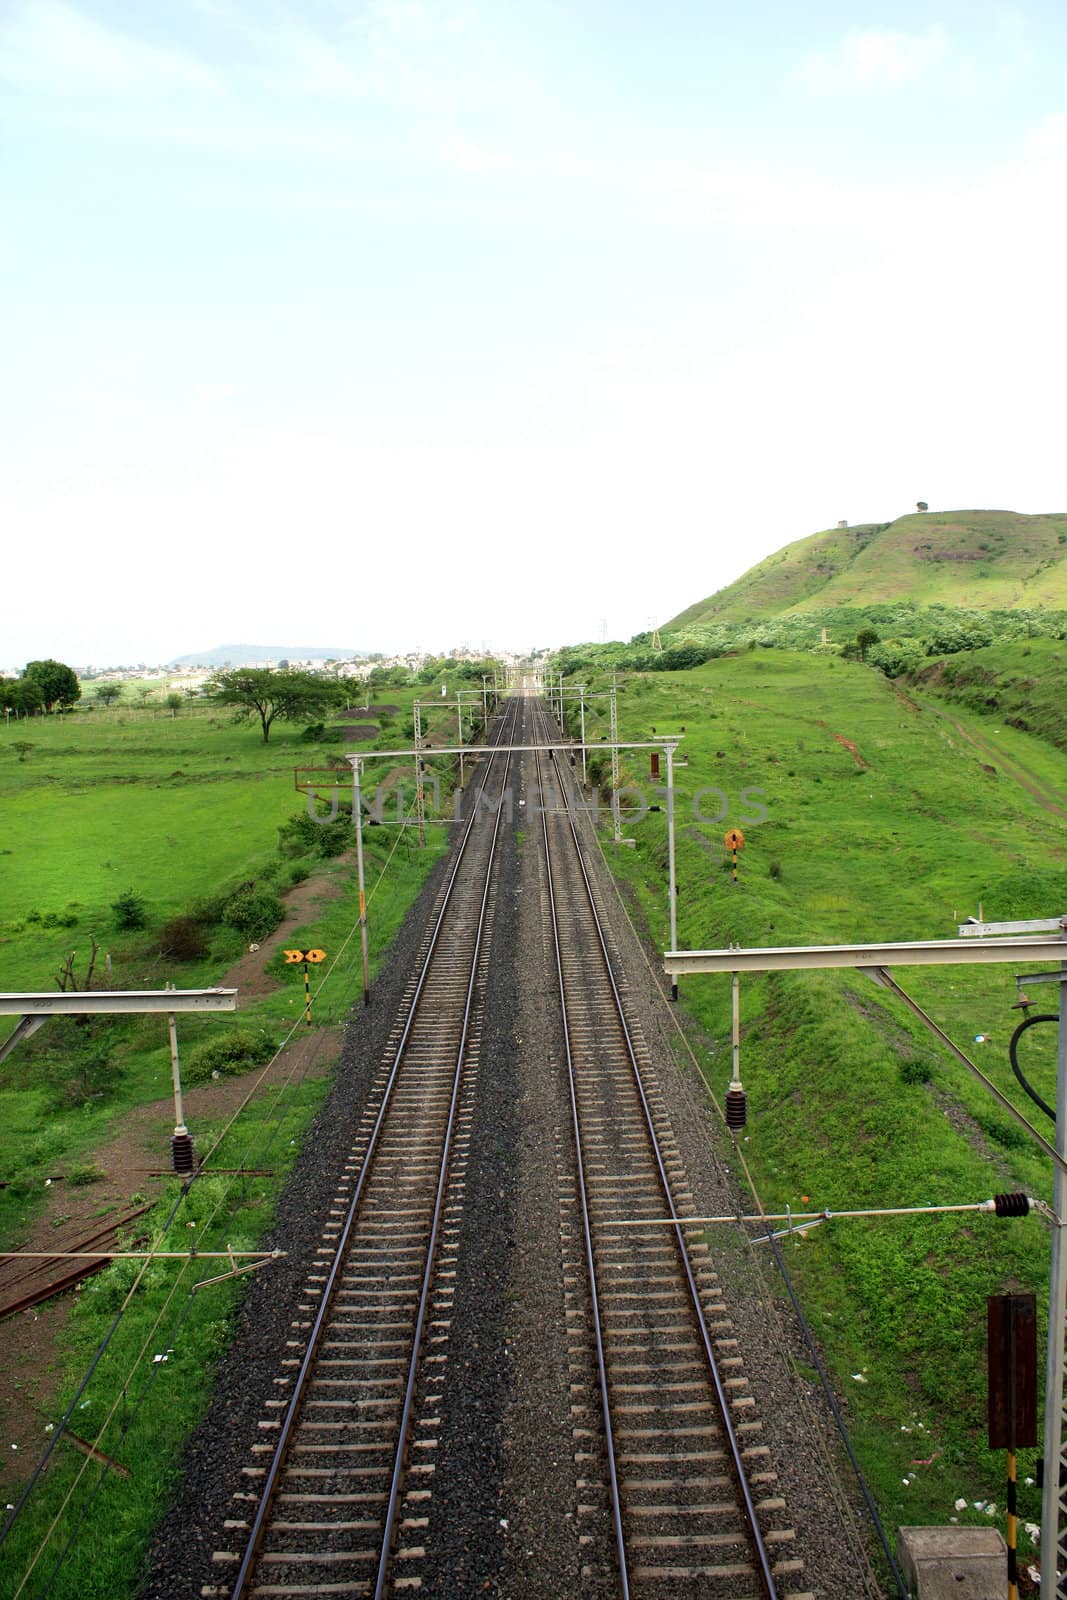 Railway tracks in the Indian countryside.